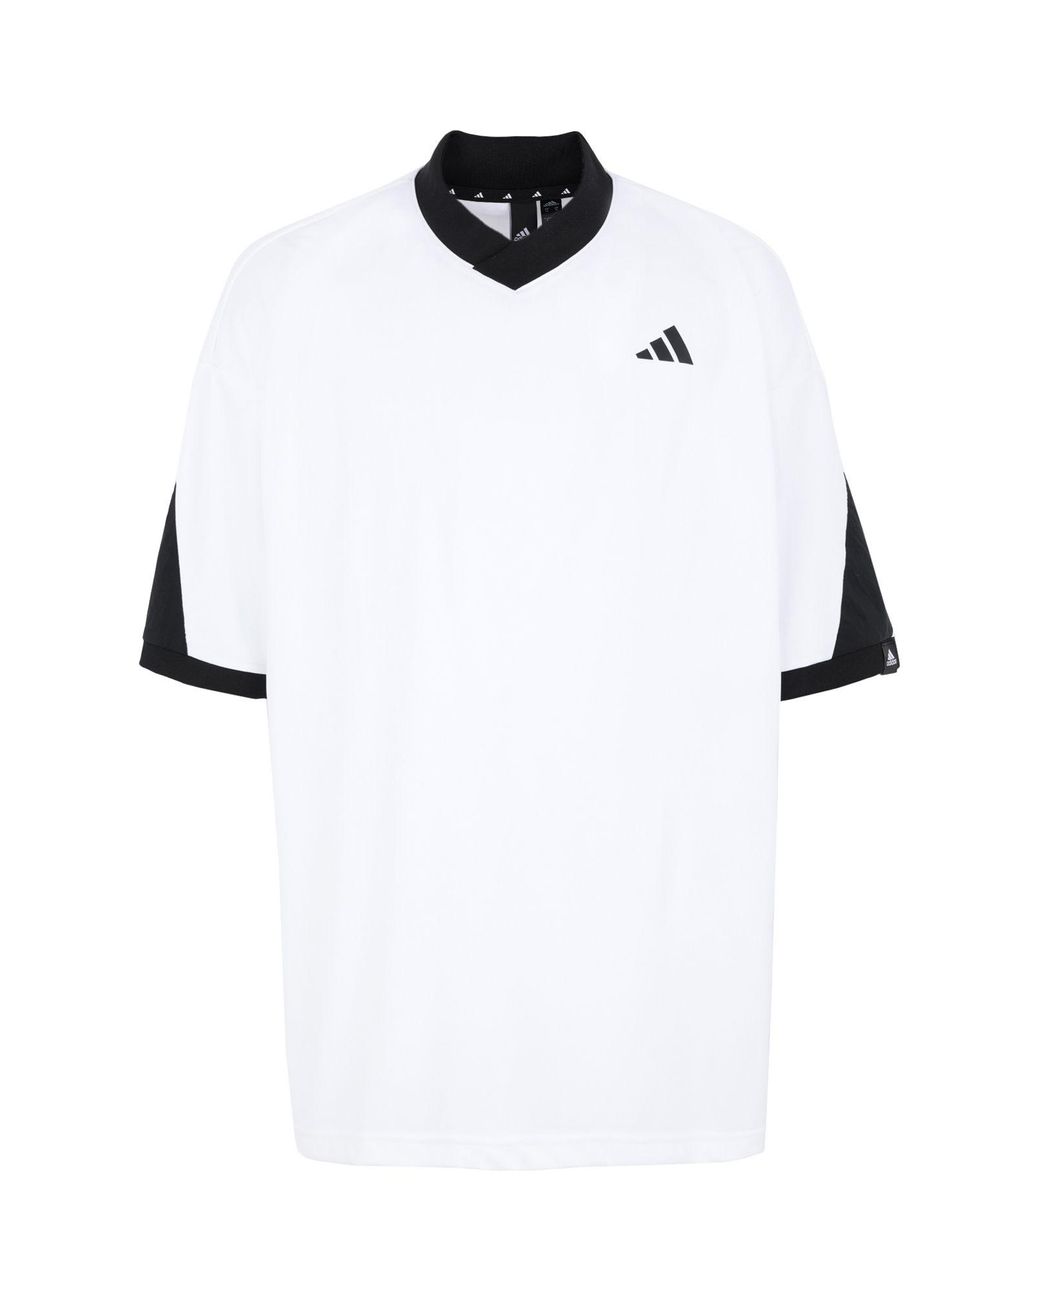 adidas T-shirt in White for Men - Lyst